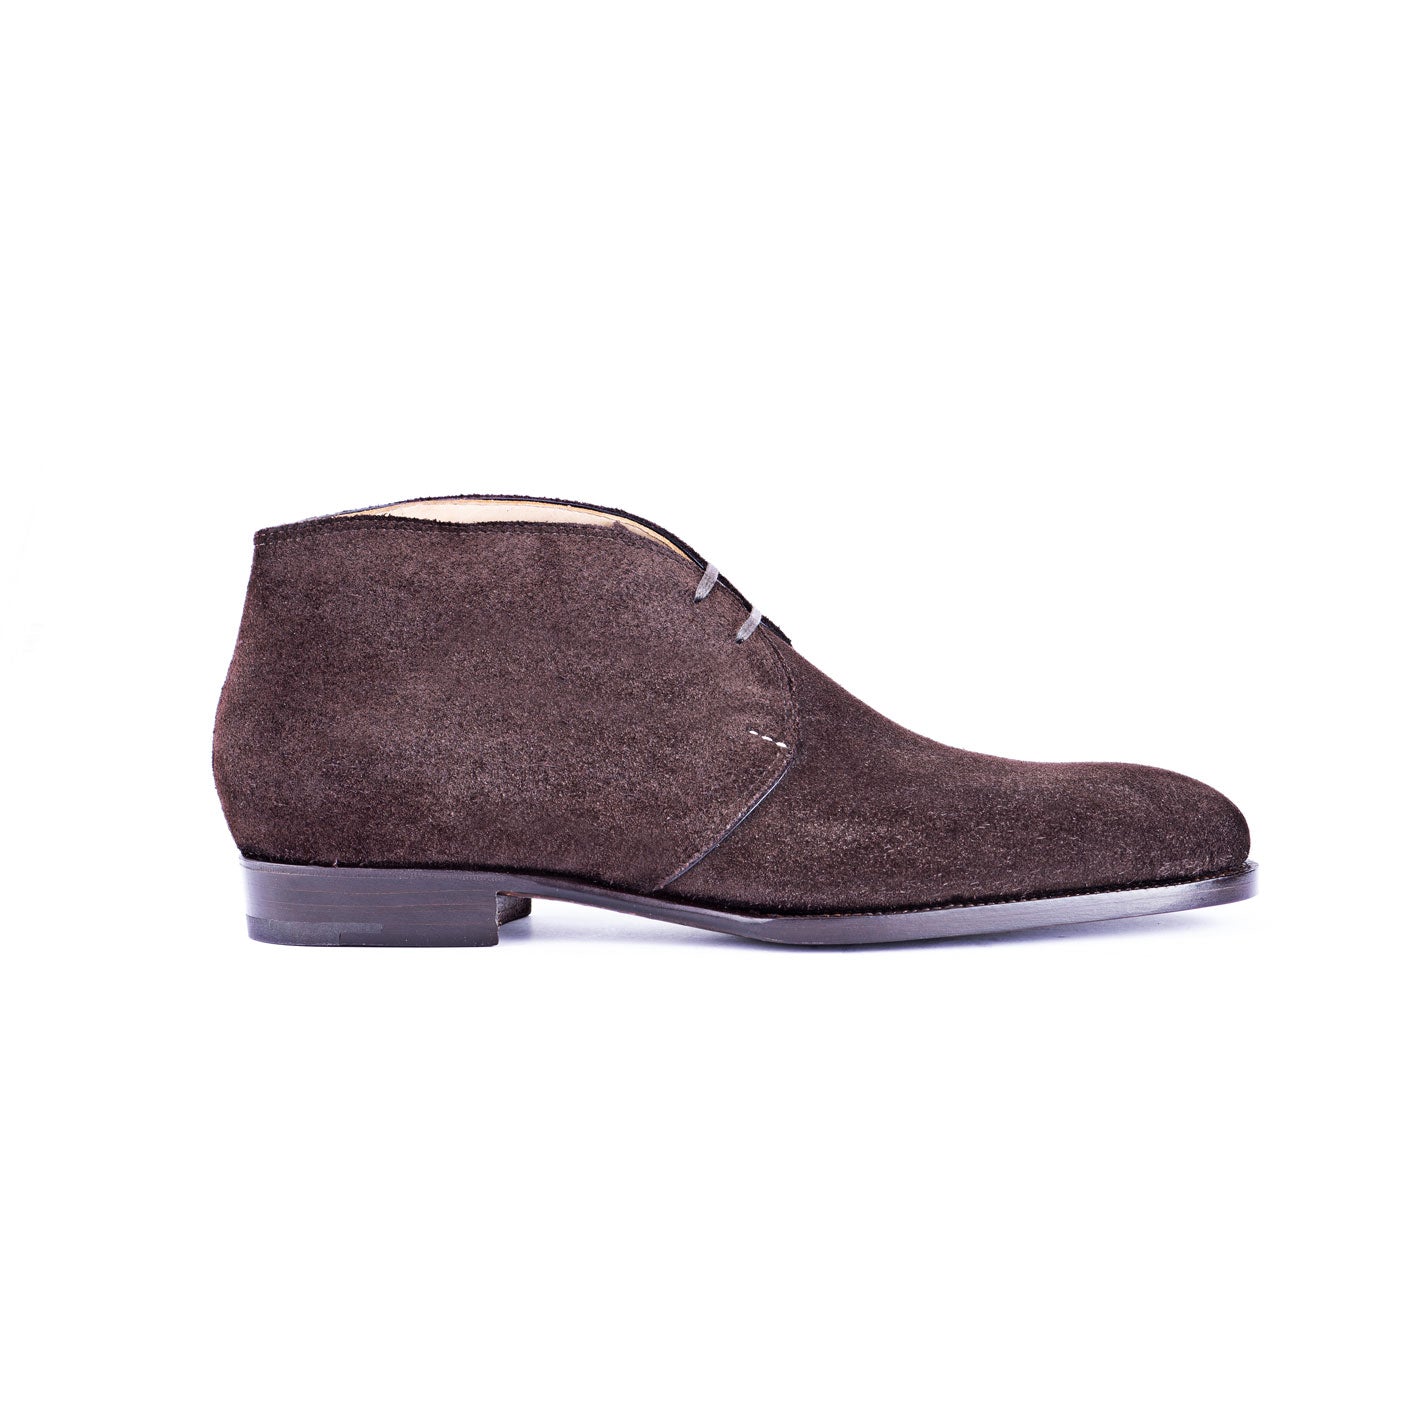 Chukka Boots with curved topline in dark brown suede